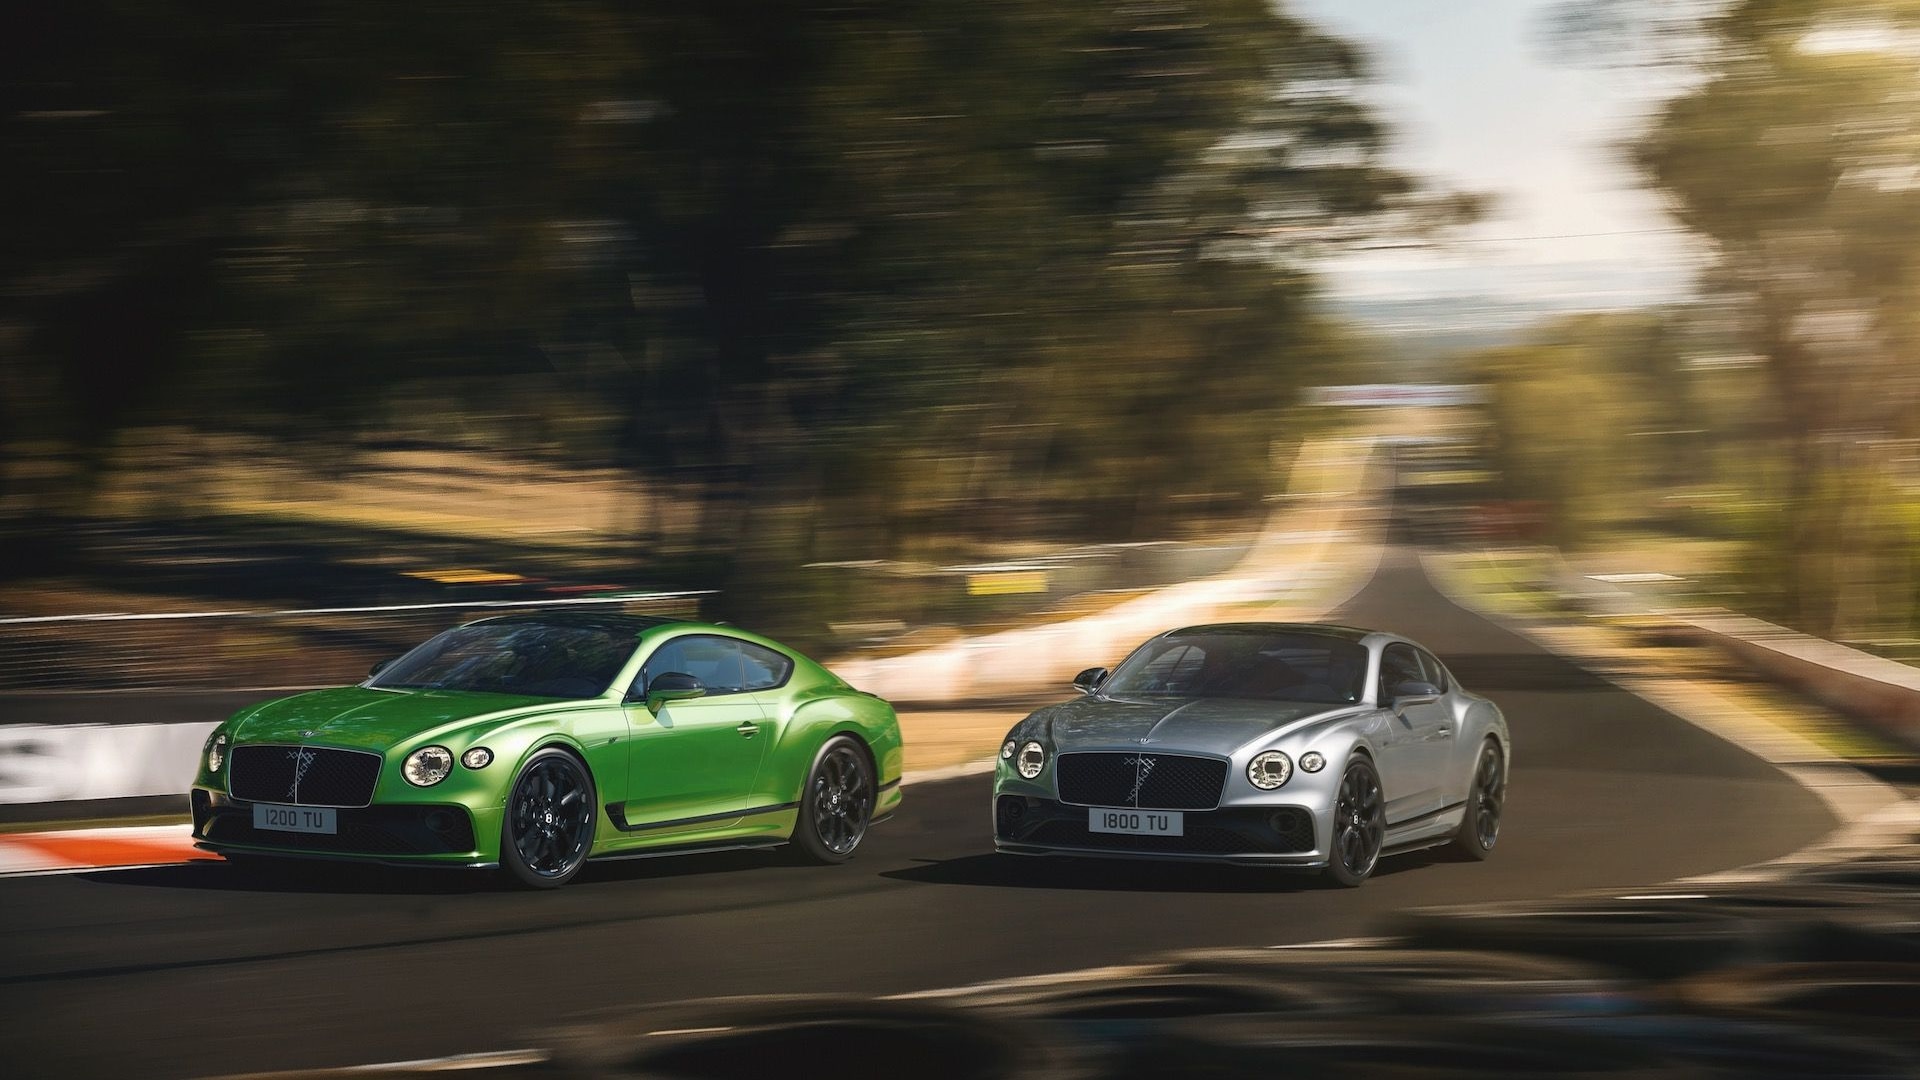 Bentley Continental GT S Bathurst special edition